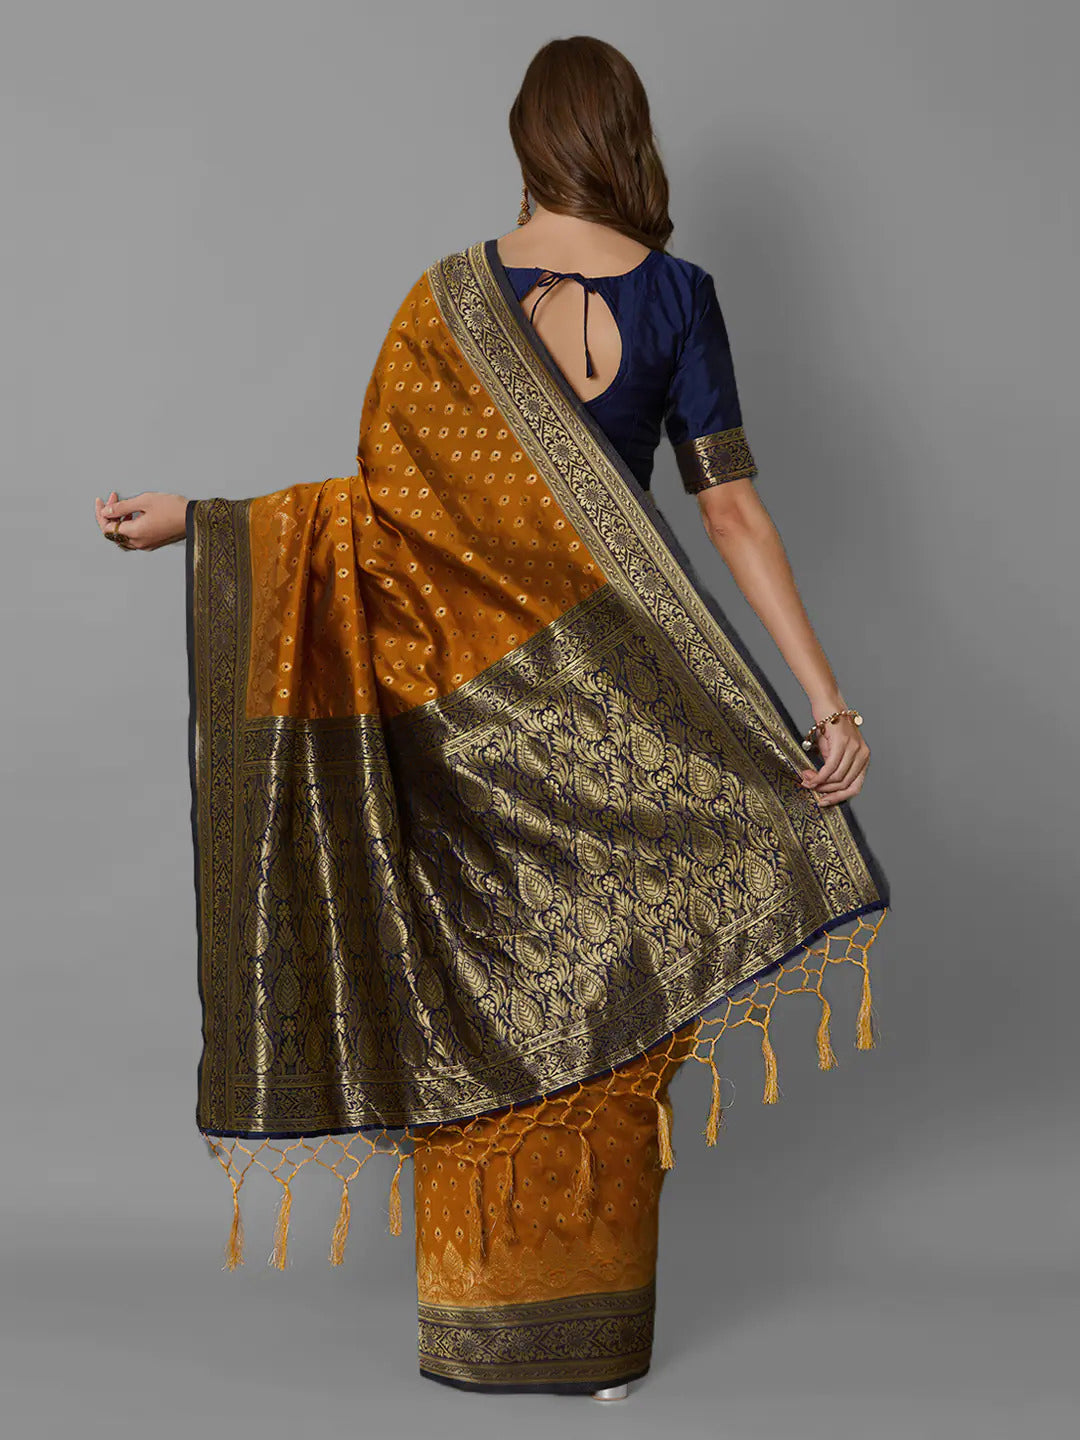 Apricot Orange and Navy Silk Saree - Indian Clothing in Denver, CO, Aurora, CO, Boulder, CO, Fort Collins, CO, Colorado Springs, CO, Parker, CO, Highlands Ranch, CO, Cherry Creek, CO, Centennial, CO, and Longmont, CO. Nationwide shipping USA - India Fashion X